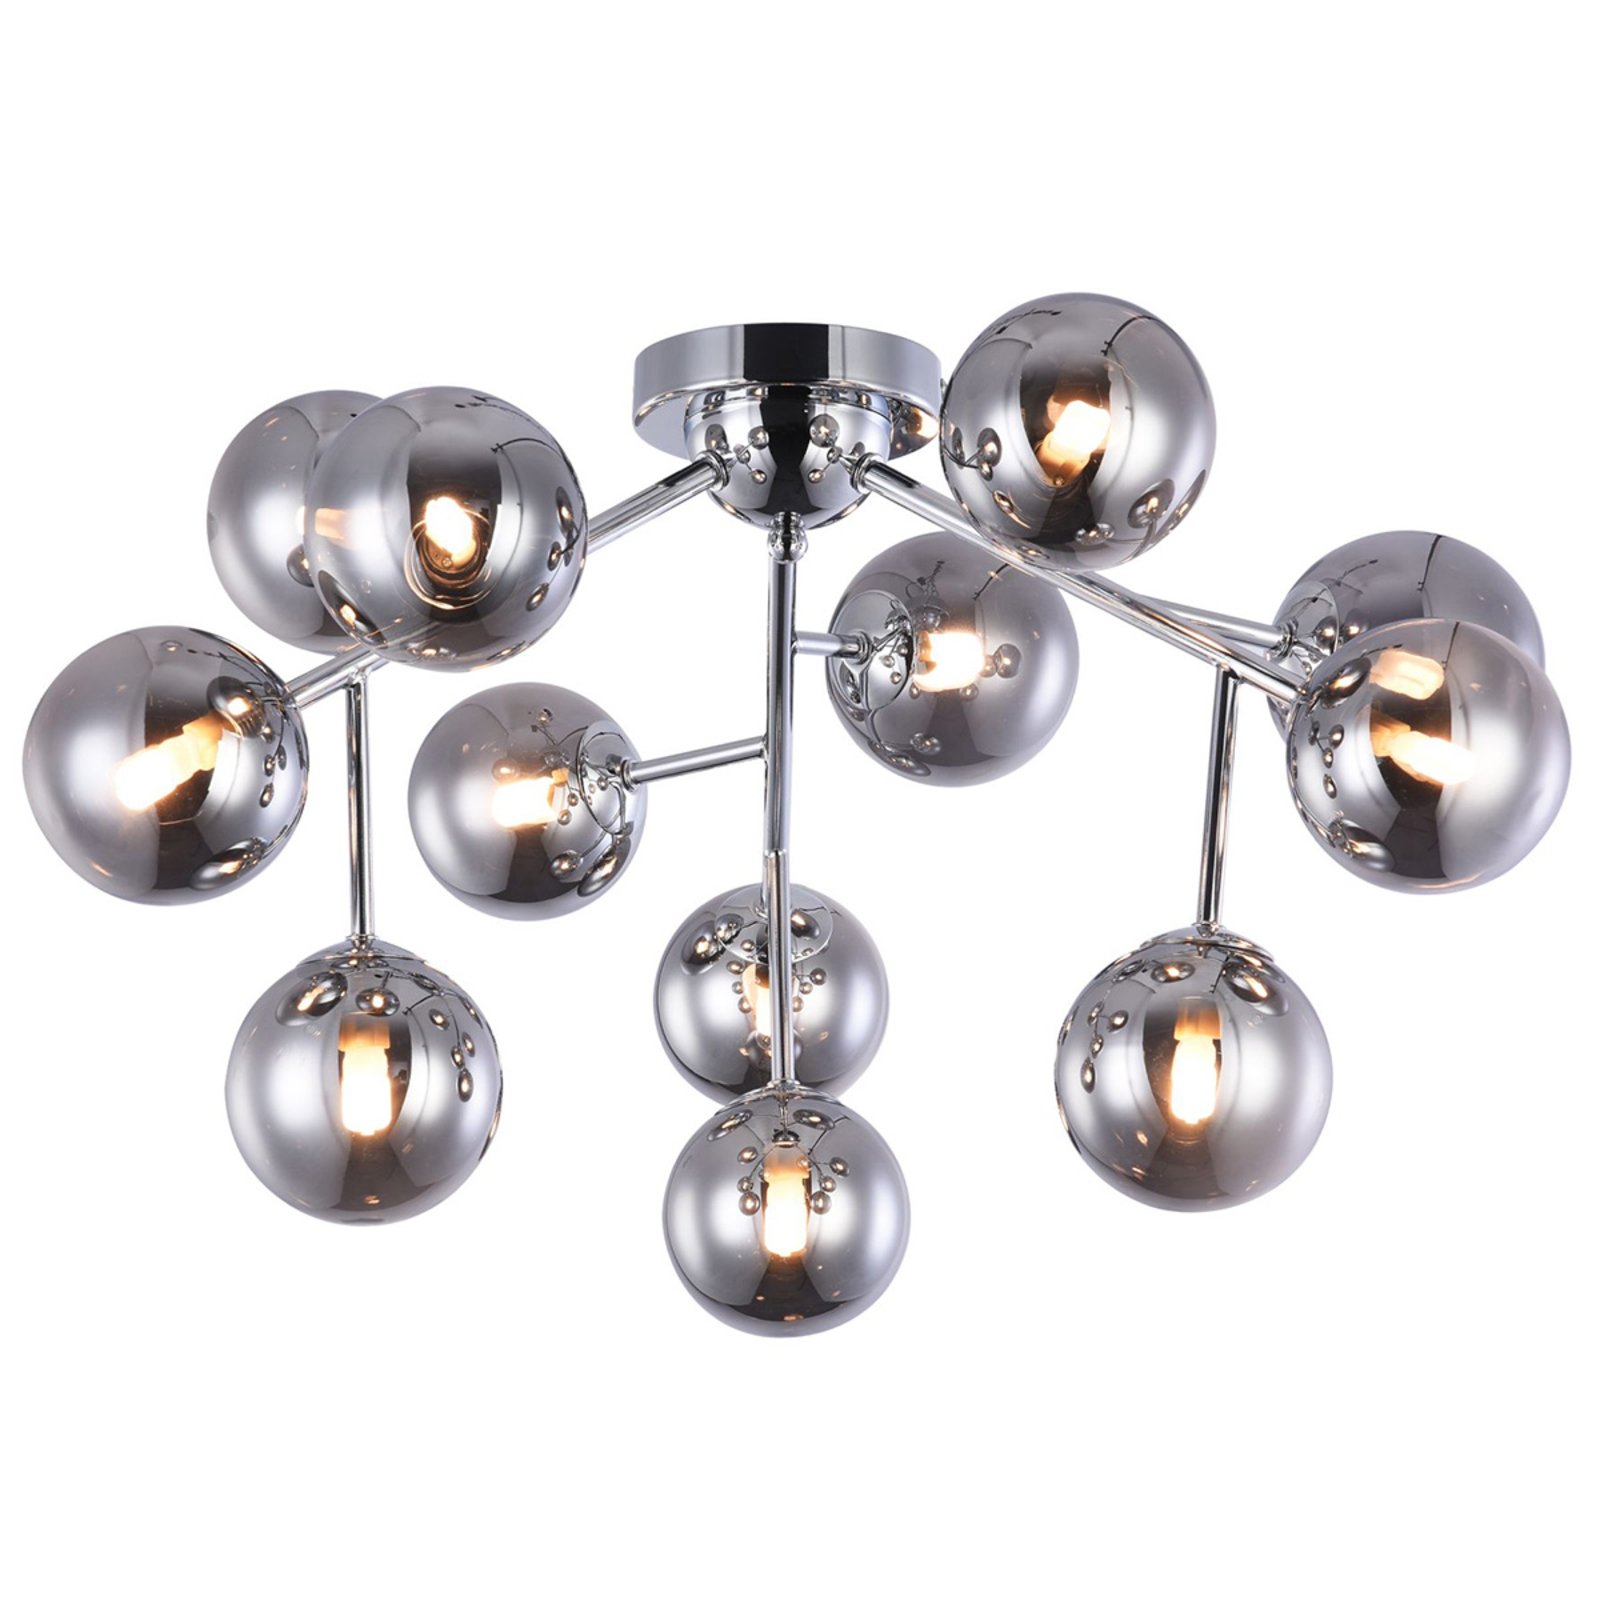 Dallas ceiling light with 12 glass spheres, chrome